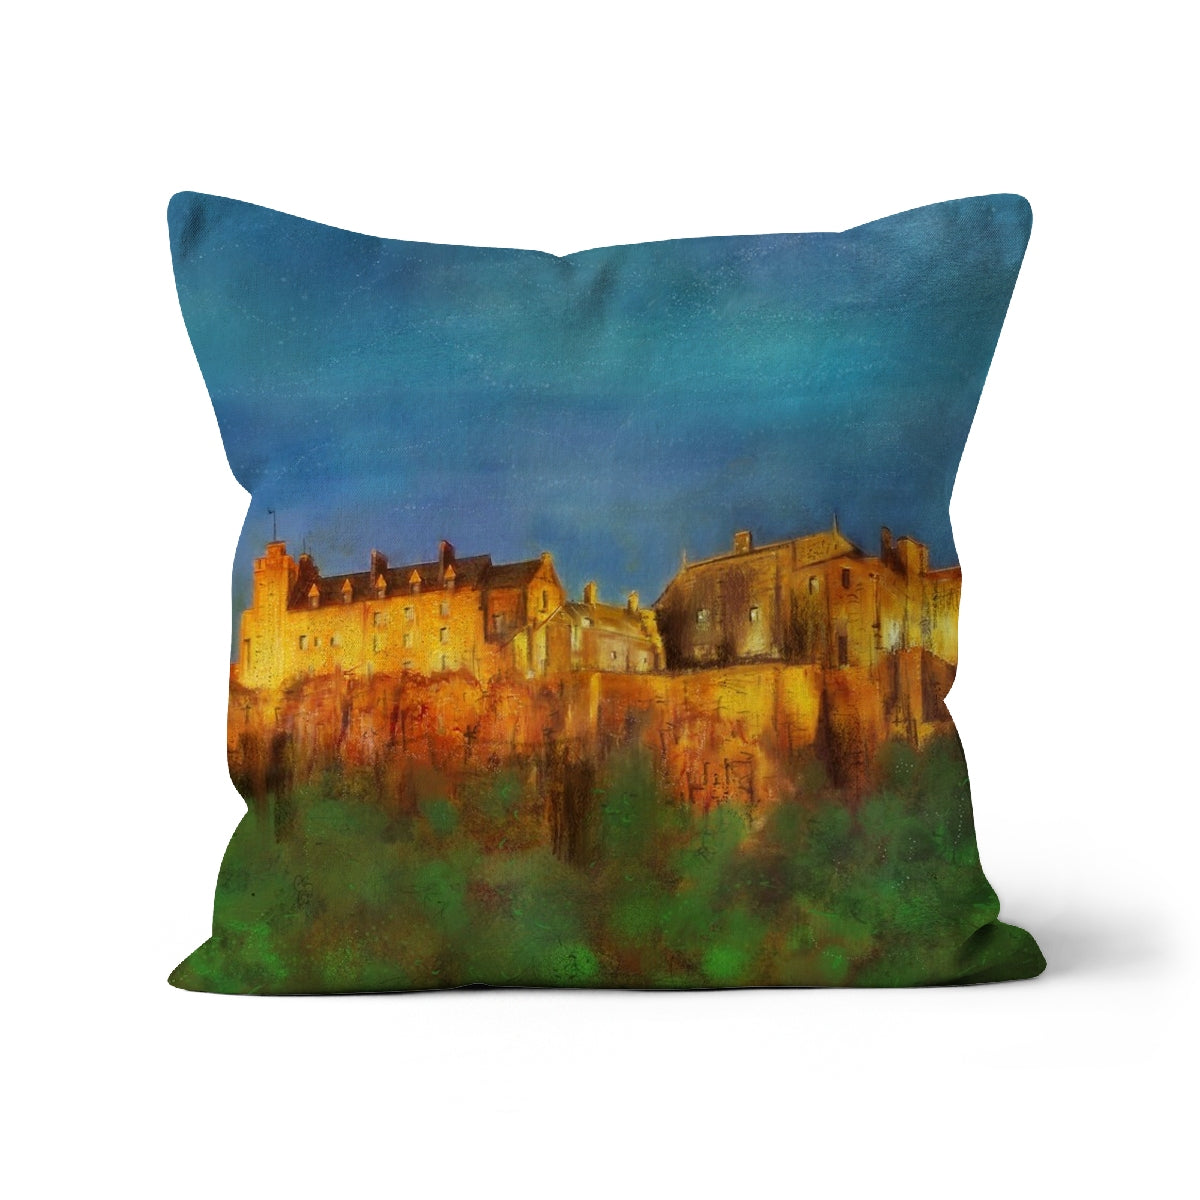 Stirling Castle Art Gifts Cushion-Cushions-Historic & Iconic Scotland Art Gallery-Linen-24"x24"-Paintings, Prints, Homeware, Art Gifts From Scotland By Scottish Artist Kevin Hunter